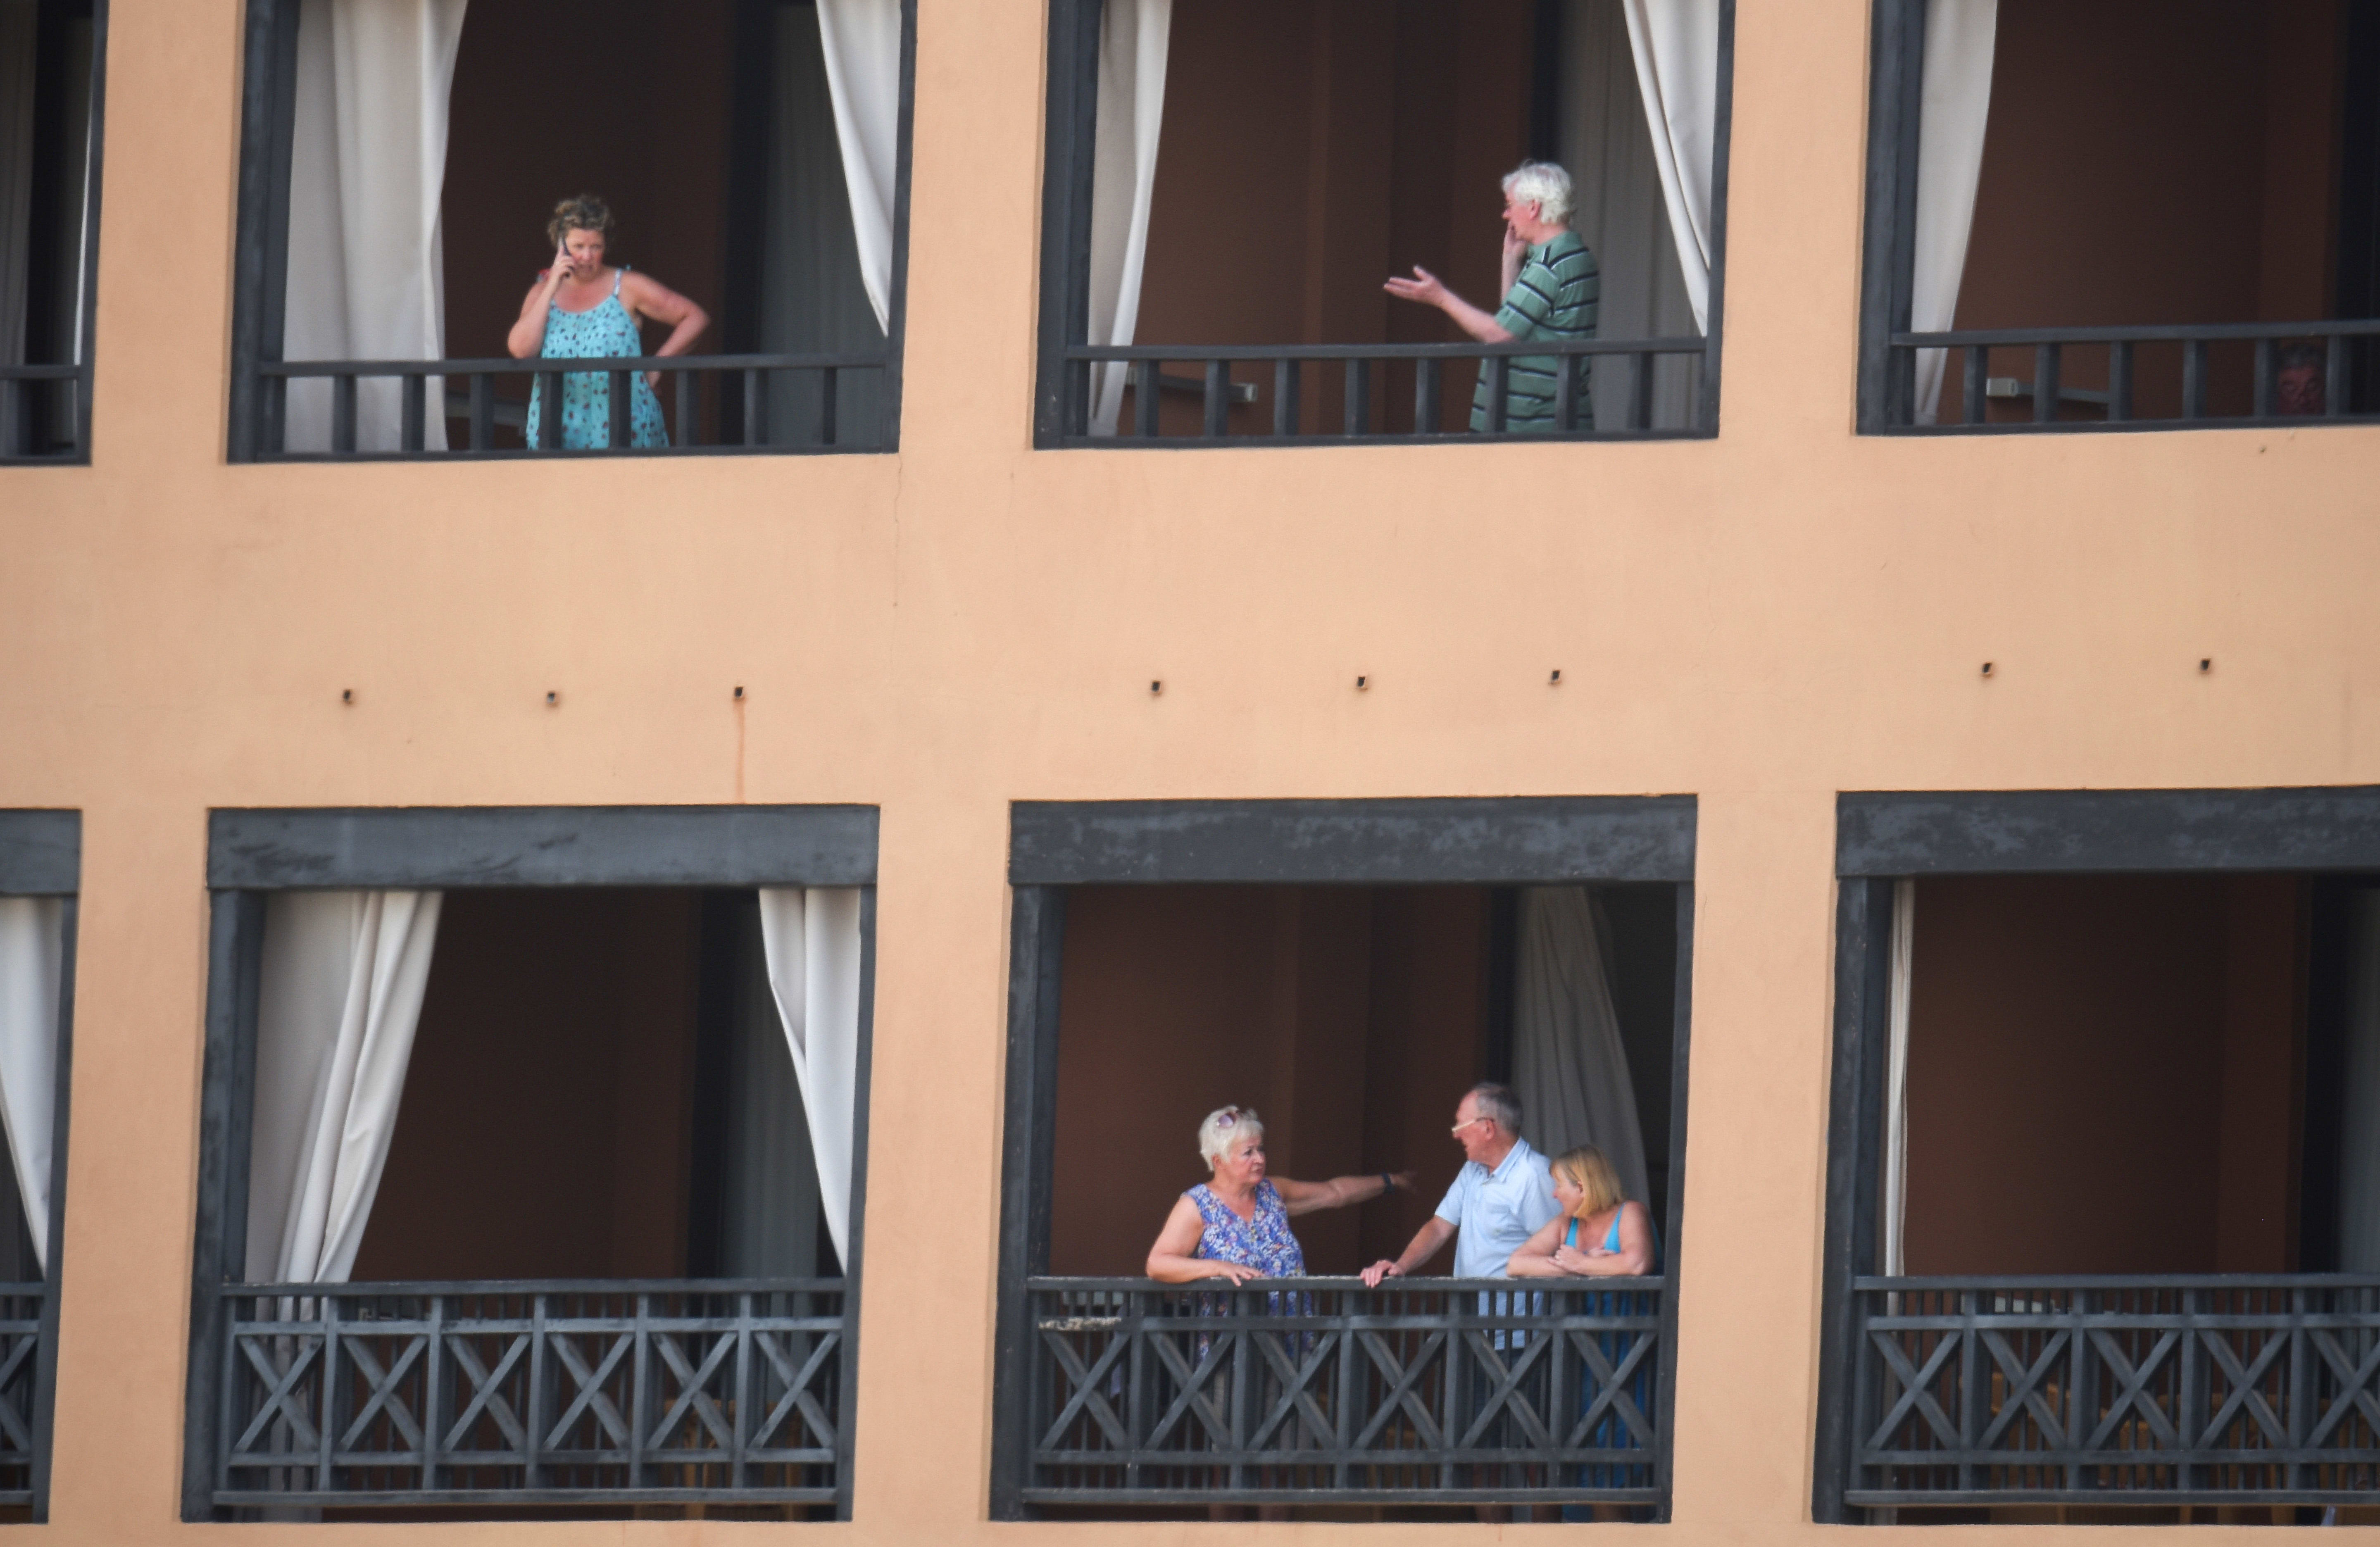 Tourists stand on the balconies of their rooms at a hotel in Tenerife, in Spain's Canary Islands. Hundreds of people were confined to their rooms after an Italian tourist was hospitalised with a suspected case of coronavirus.